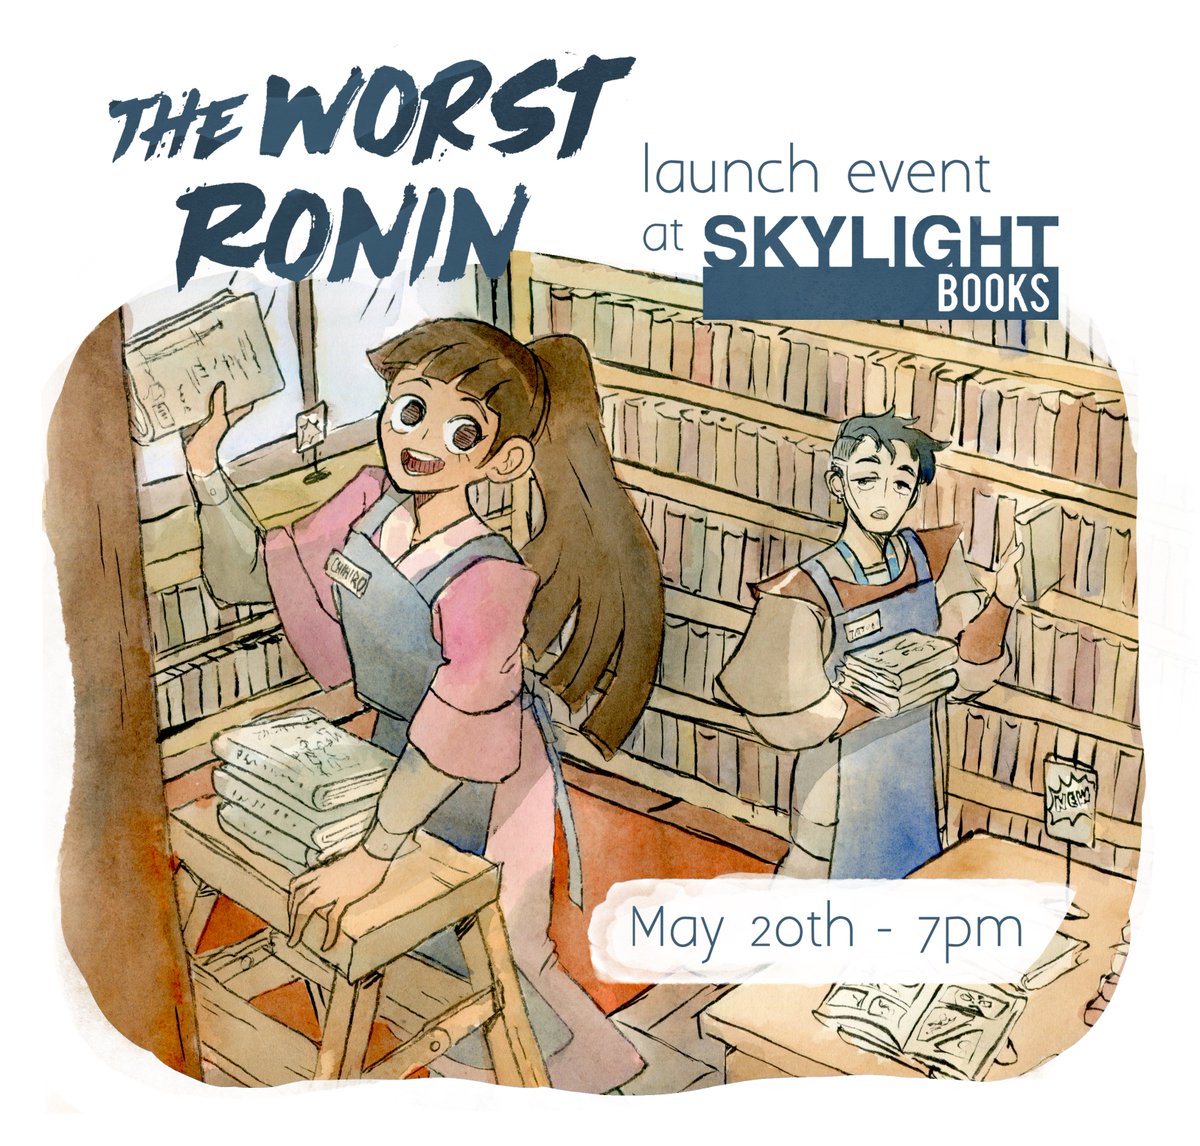 The Worst Ronin debuts in 2 weeks! 🫣 Come celebrate its launch with me and @emteehall at @skylightbooks on Monday, May 20th at 7pm and get your copy signed. Hope to see some of you there! 🥳